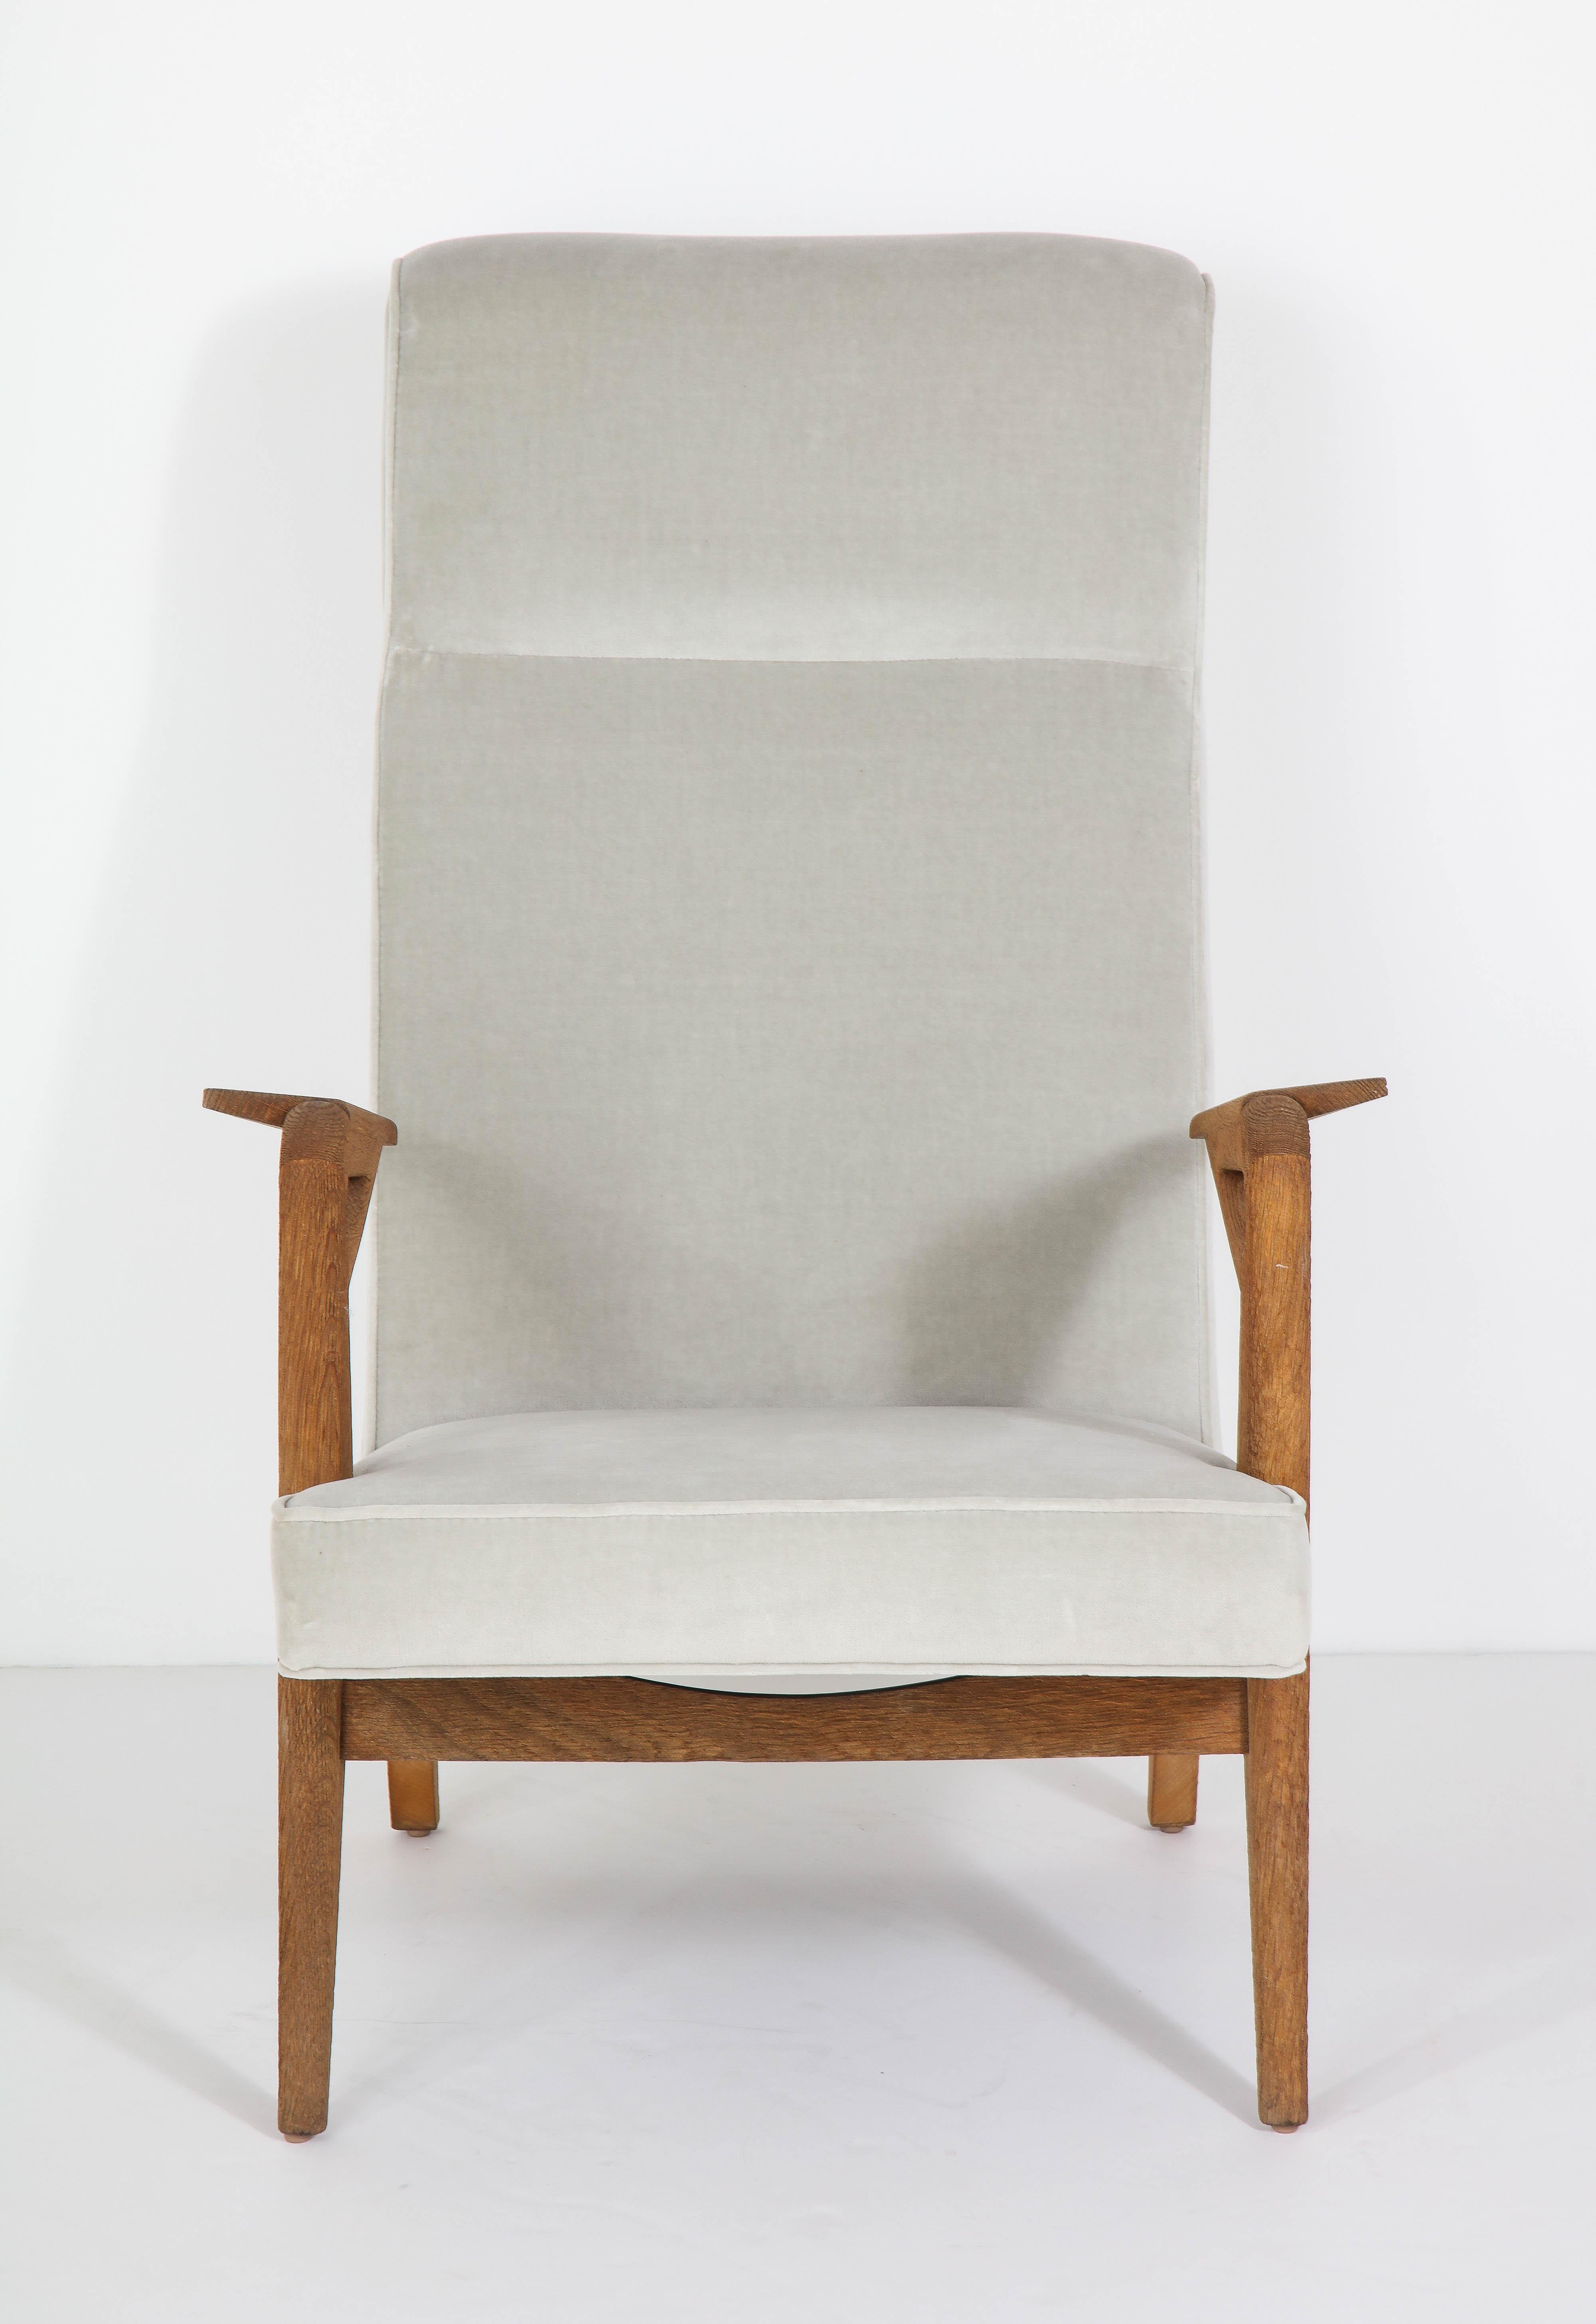 Parker-Knoll Oak Armchairs In Good Condition For Sale In Newburgh, NY